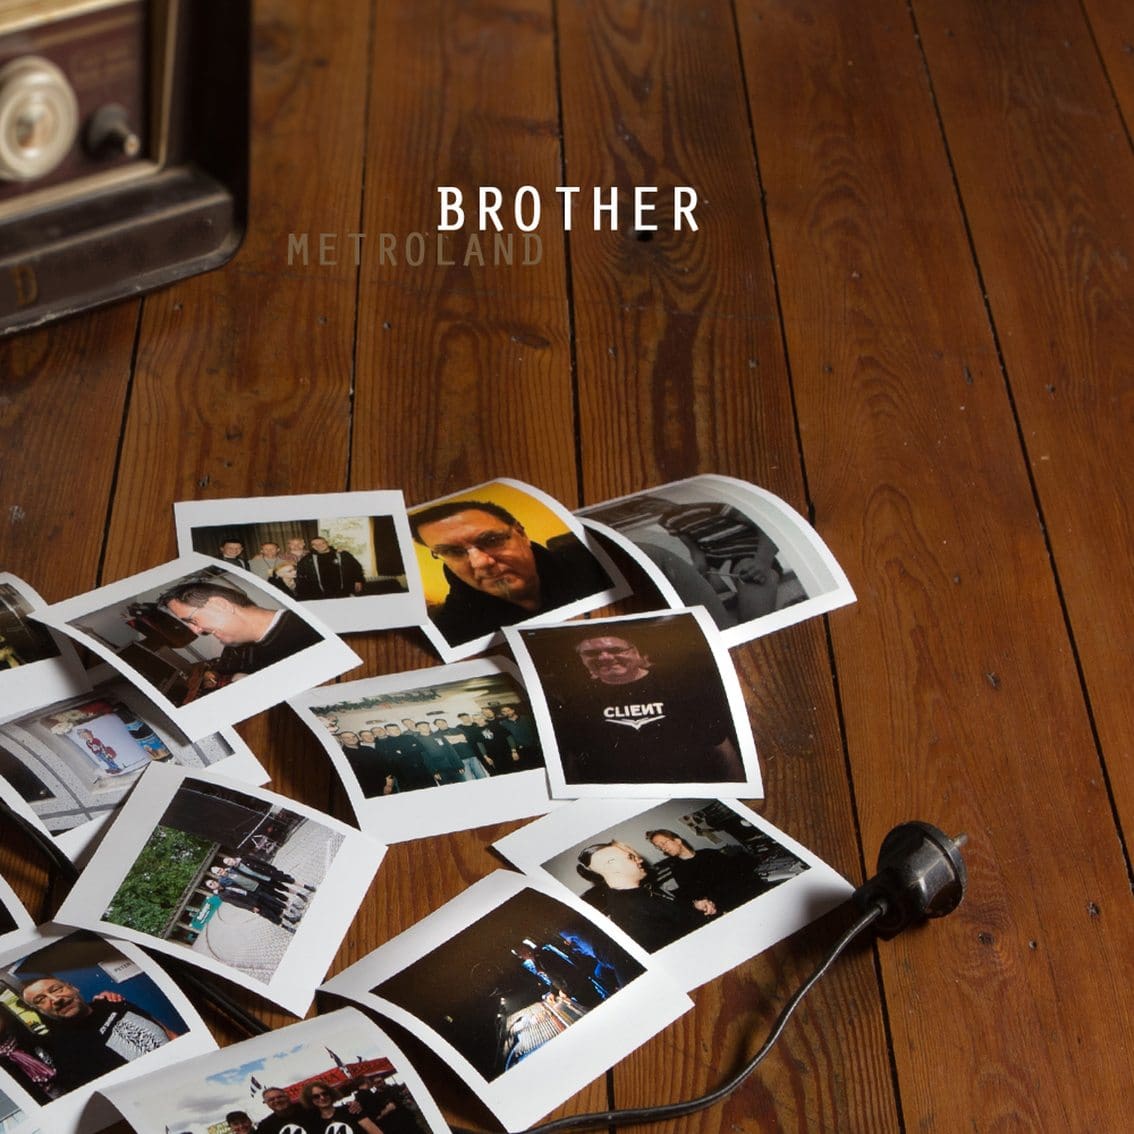 Metroland to officially release 'Brother' single tomorrow - 1 year after Louis Zachert passed away